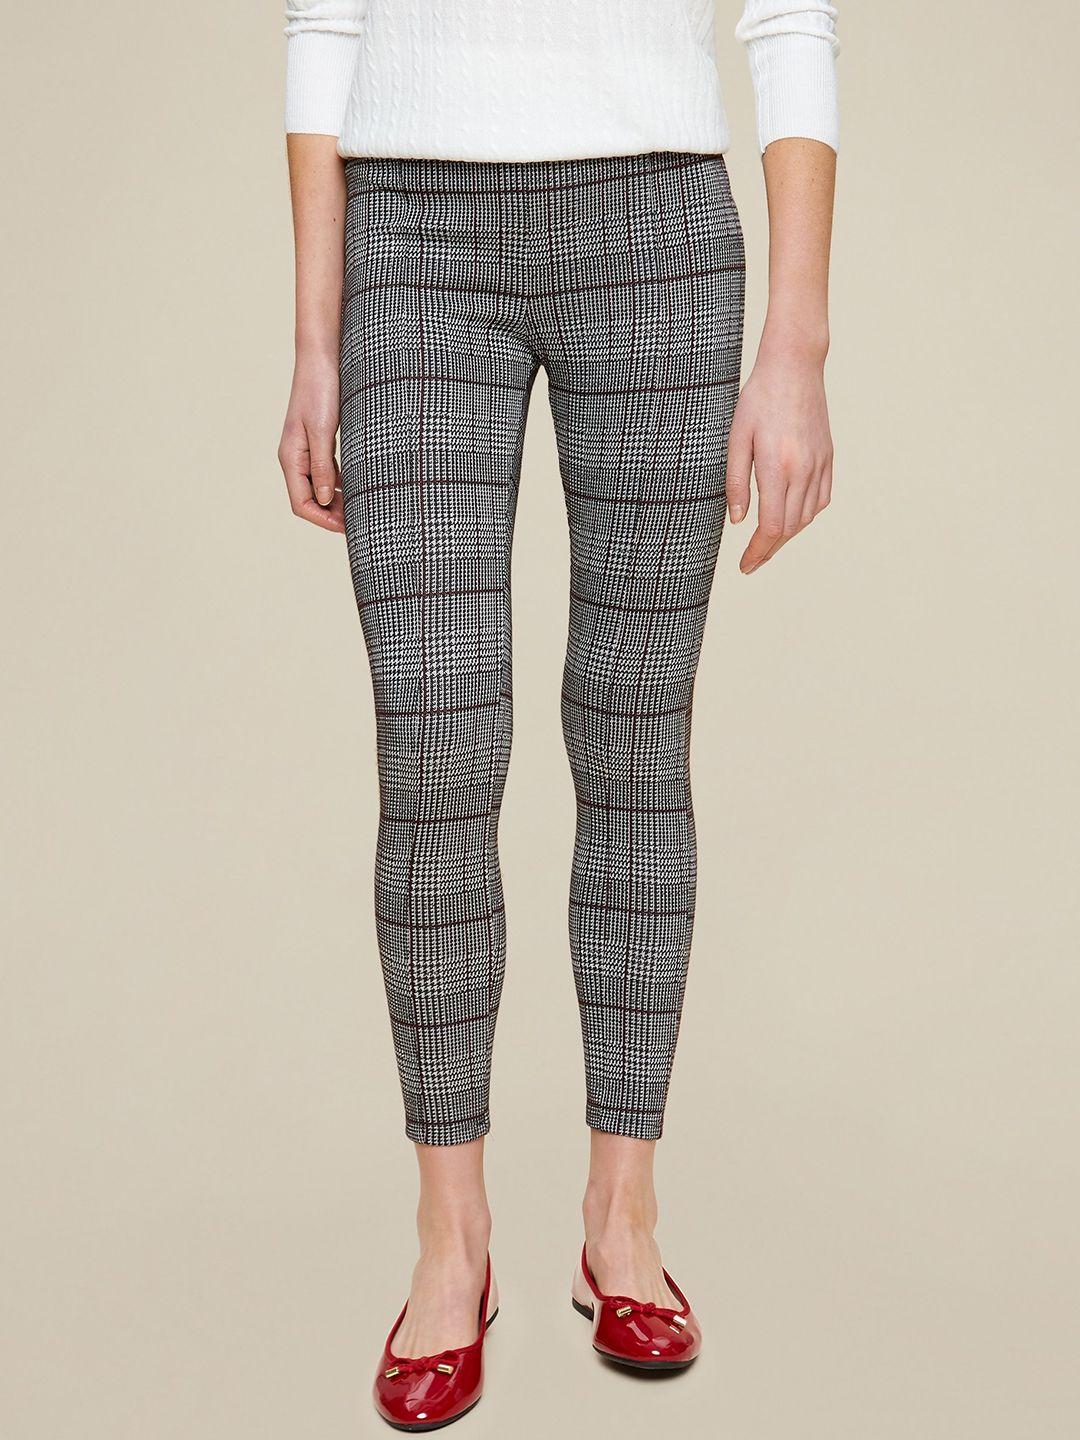 dorothy perkins women black & off-white houndstooth patterned cropped treggings